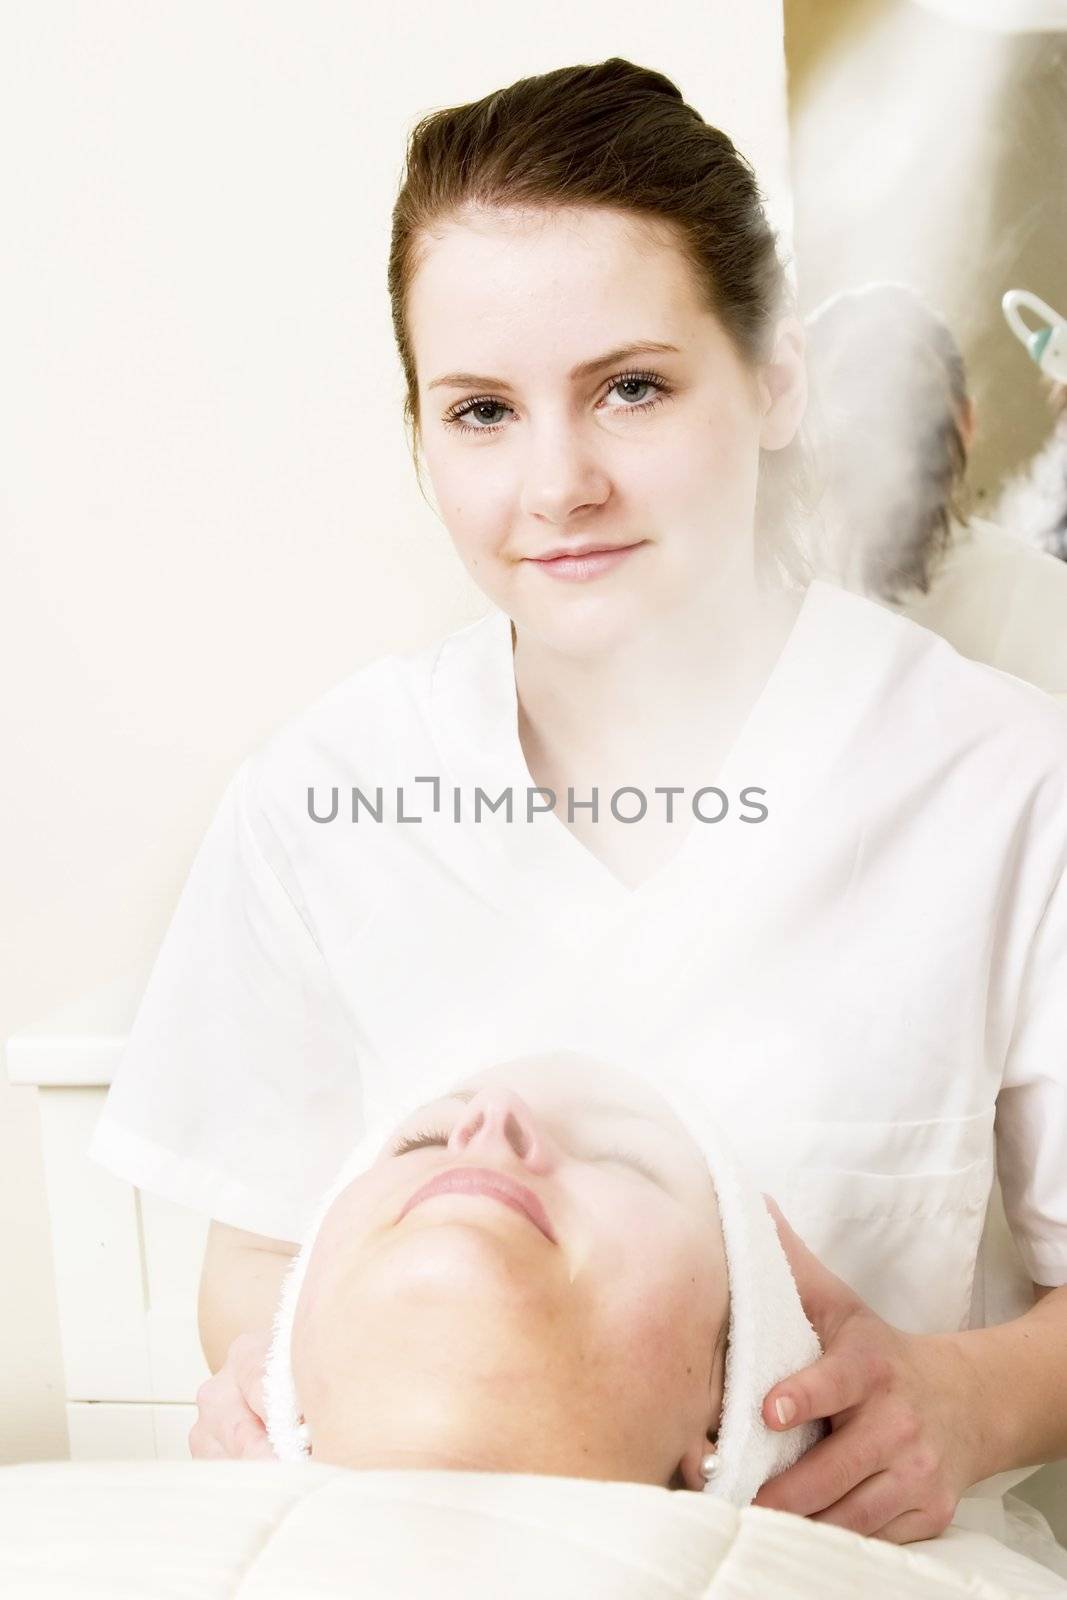 Steam treatment during a facial at a beauty spa.